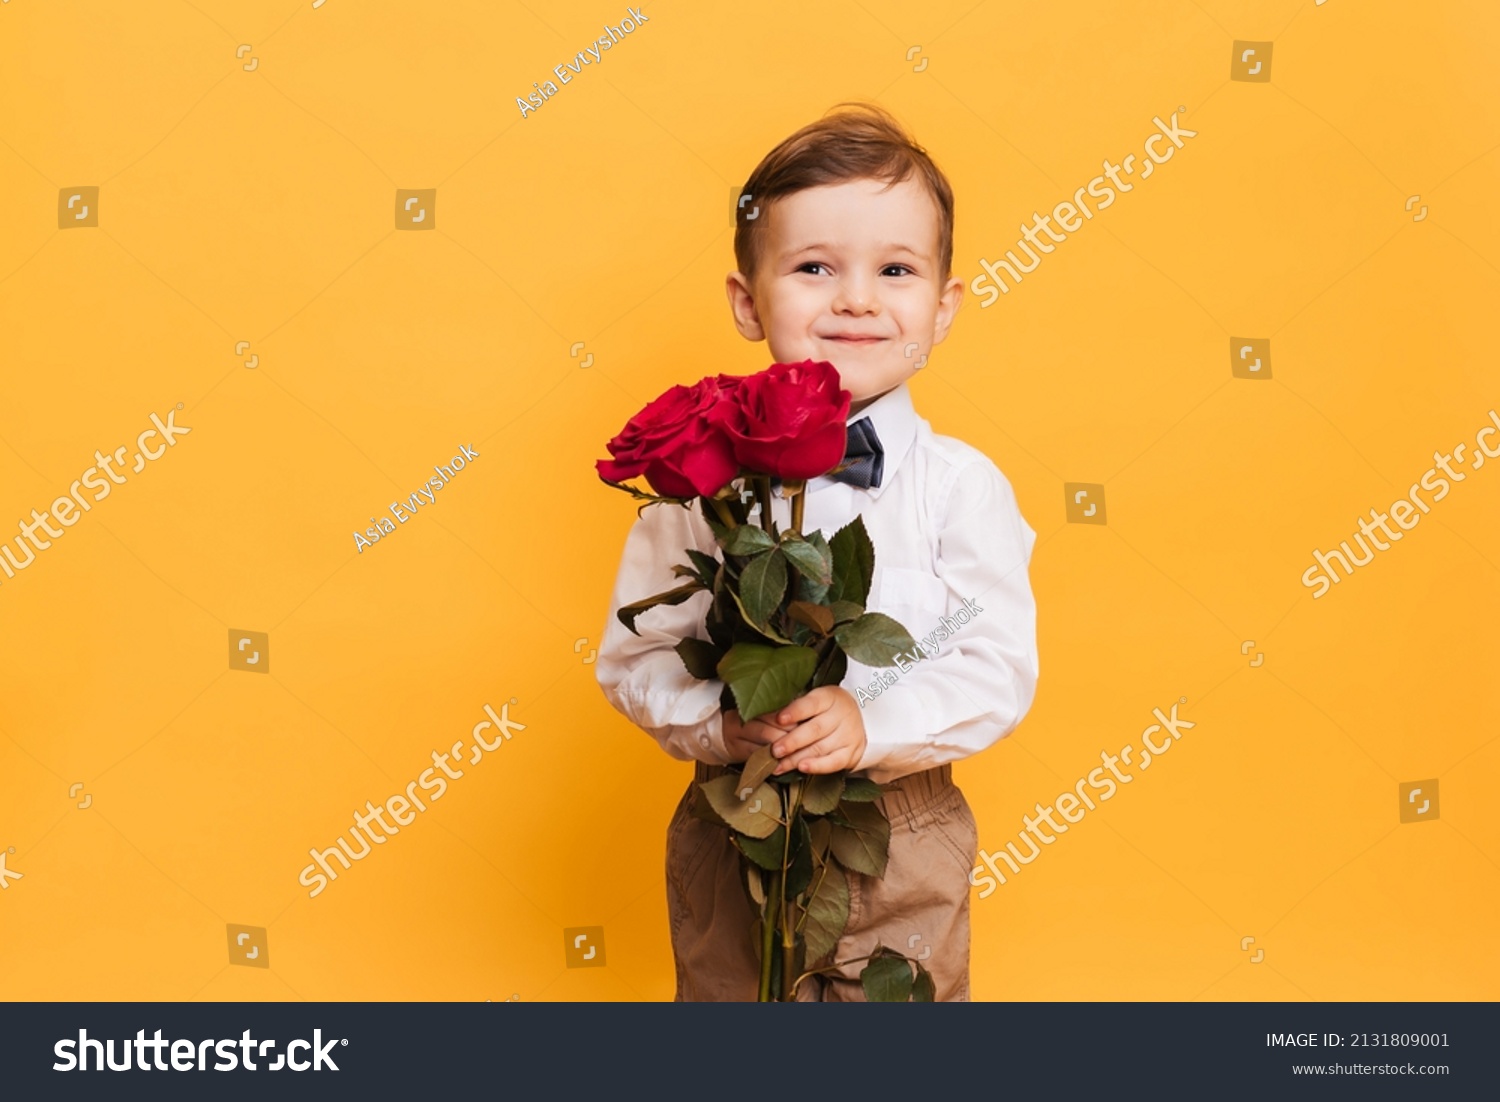 Boy in a white shirt, pants and a bow tie on a yellow background holds in his hands bouquet a red roses. A gift for my mother, grandmother. #2131809001